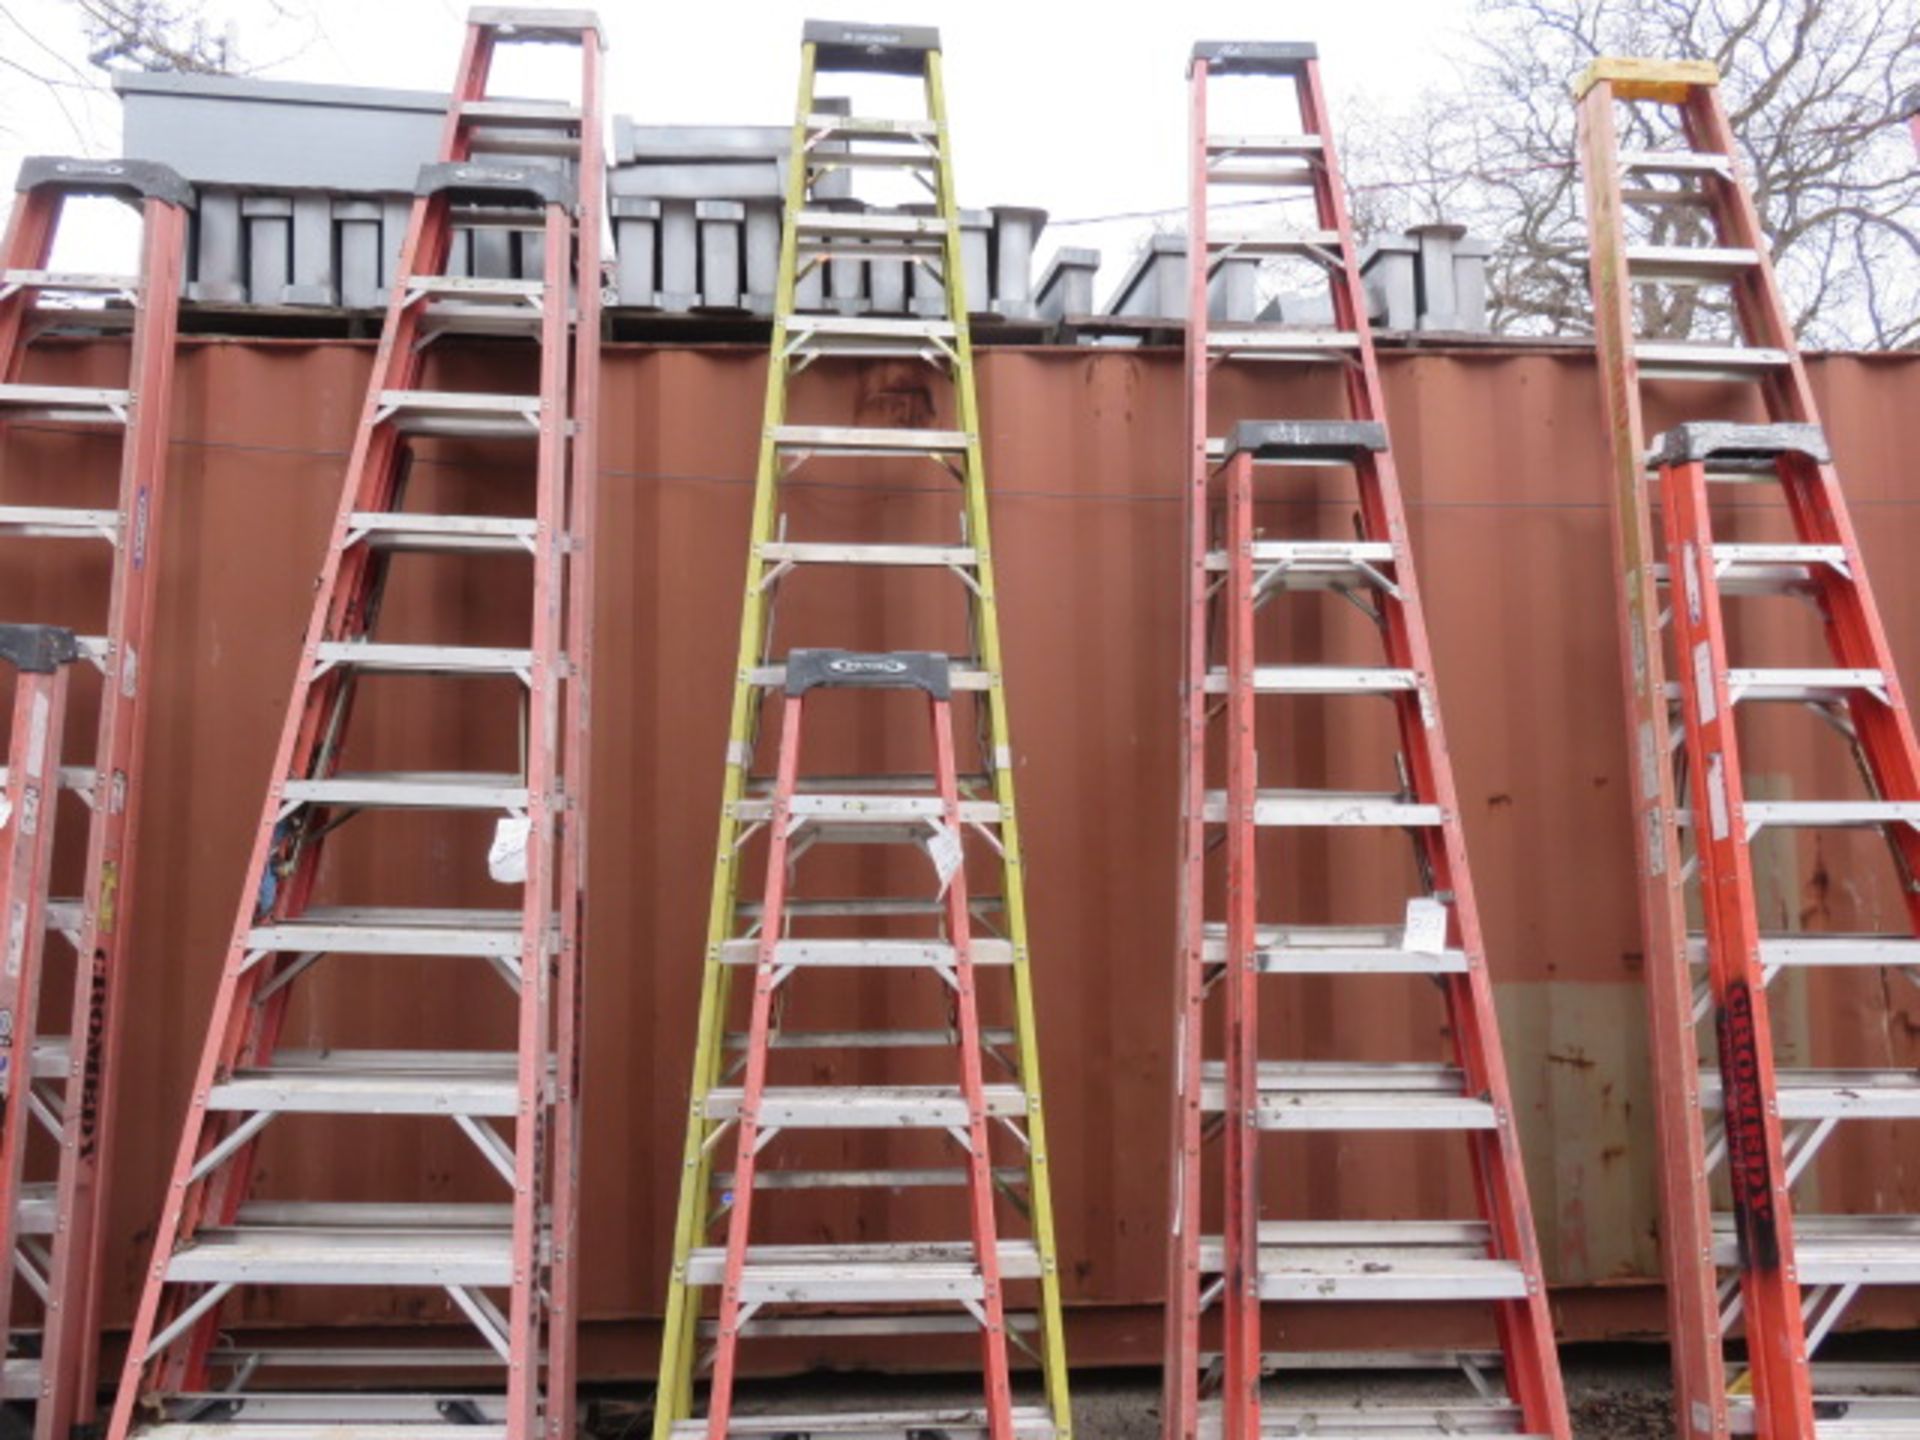 FEATHERLITE 12 FT AND WERNER 6 FT. FIBERGLASS A-FRAME LADDERS - Image 2 of 2